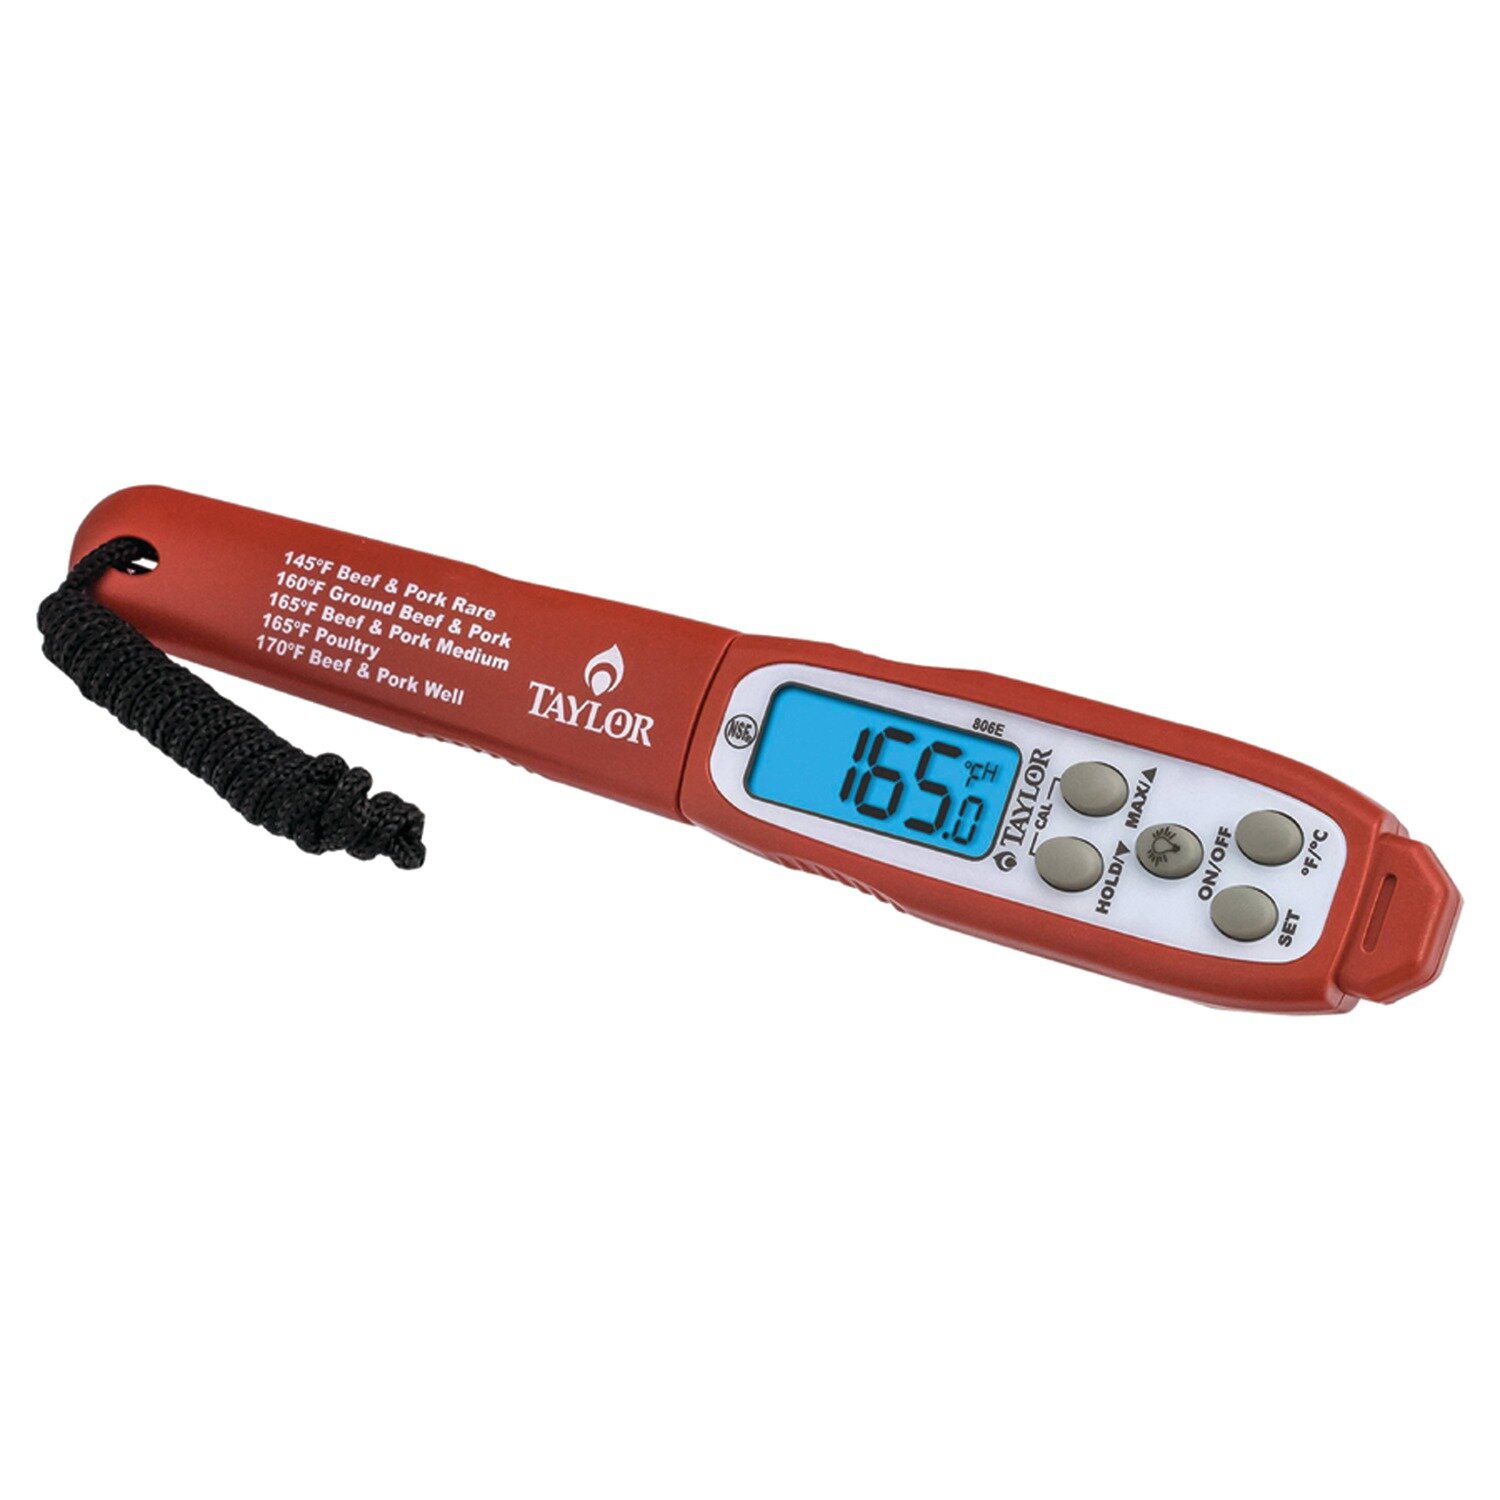 Taylor Waterproof Digital Meat Thermometer